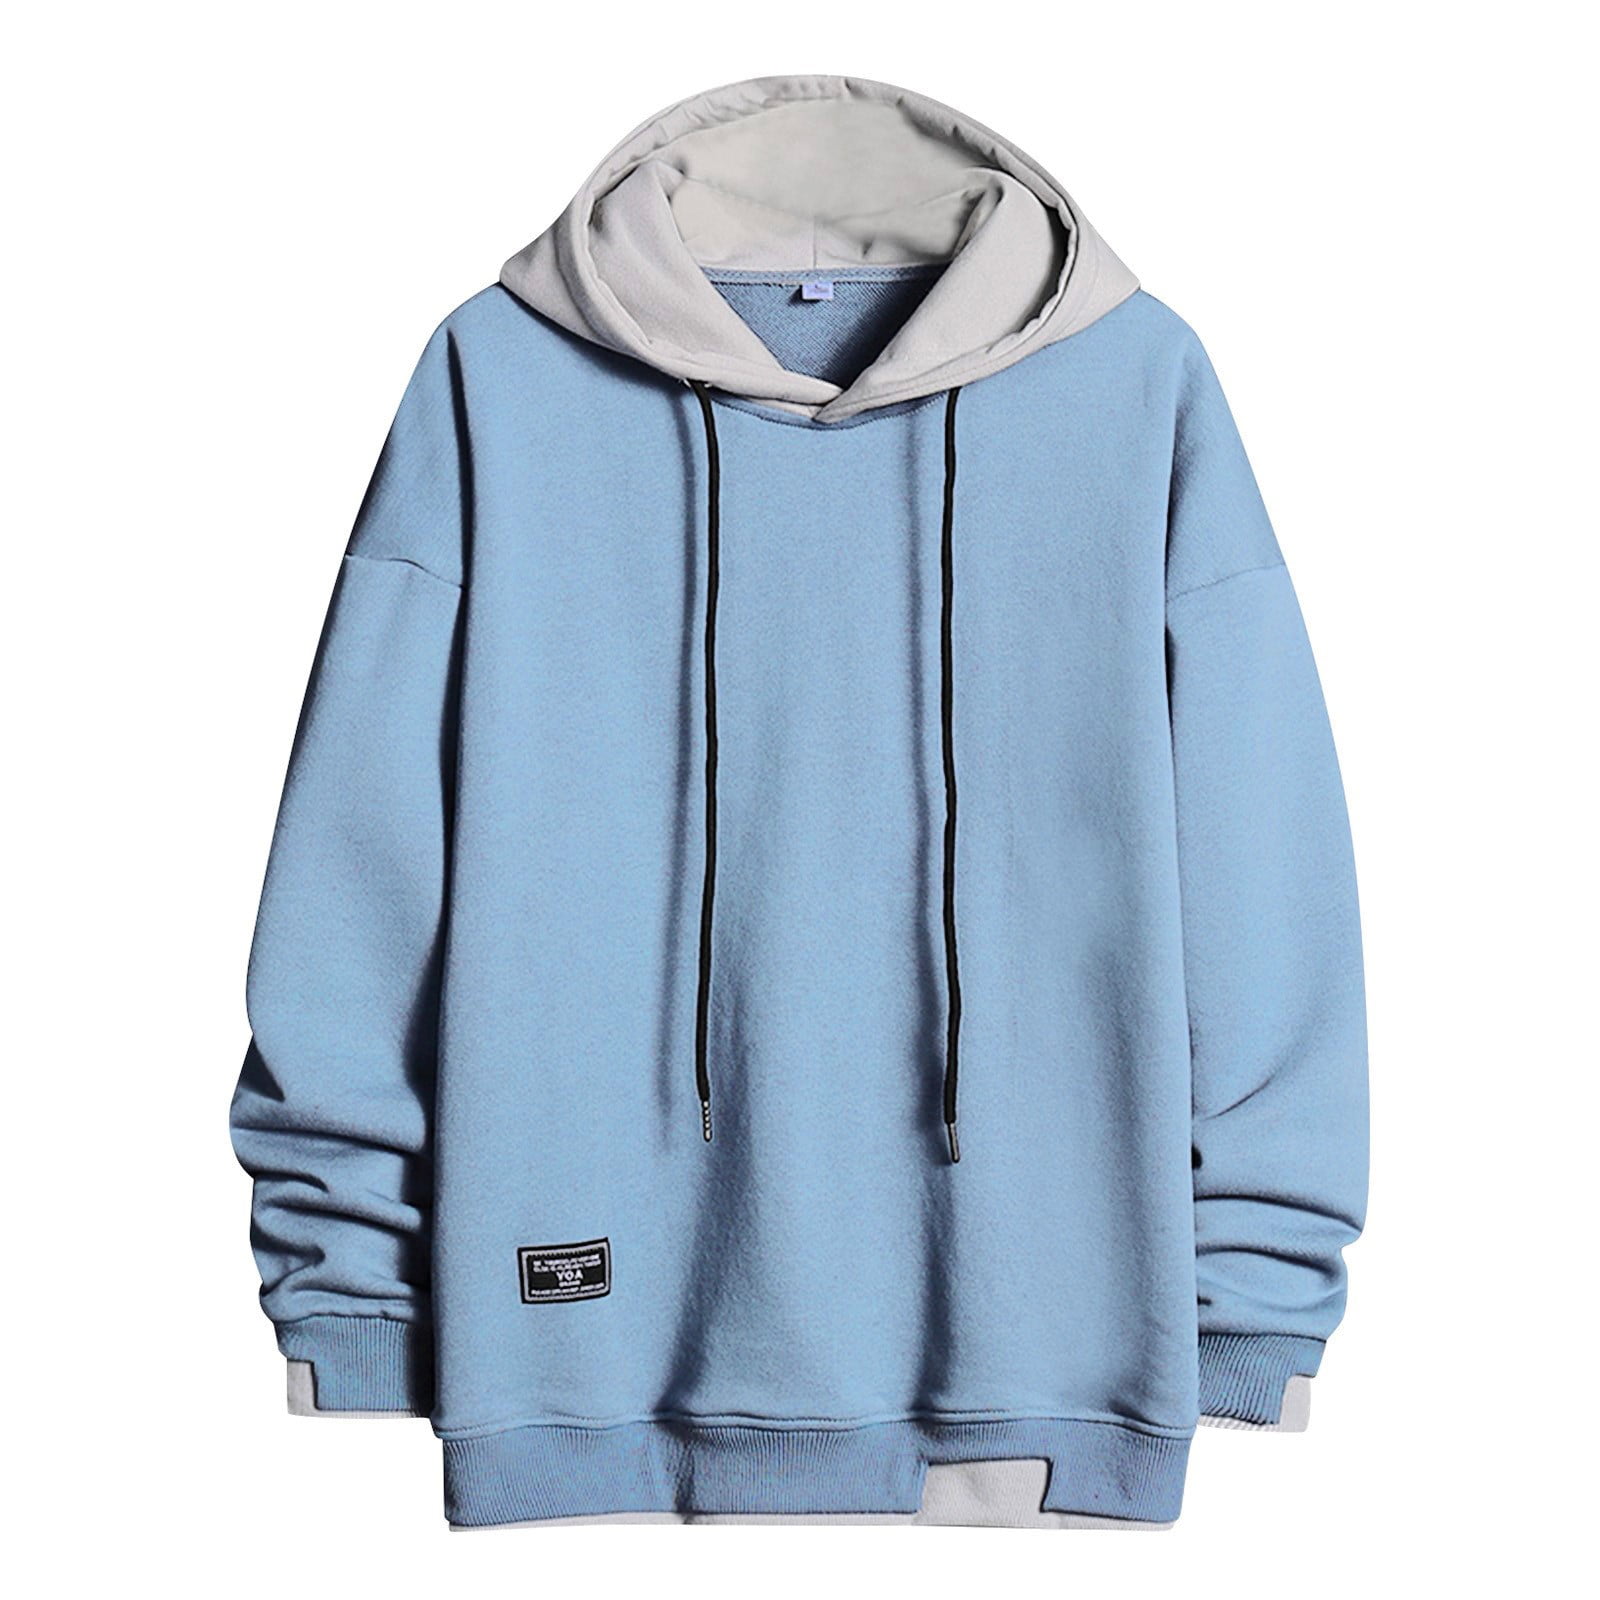 Oversized Zip up Hoodie Male Autumn And Winter Leisure Travel